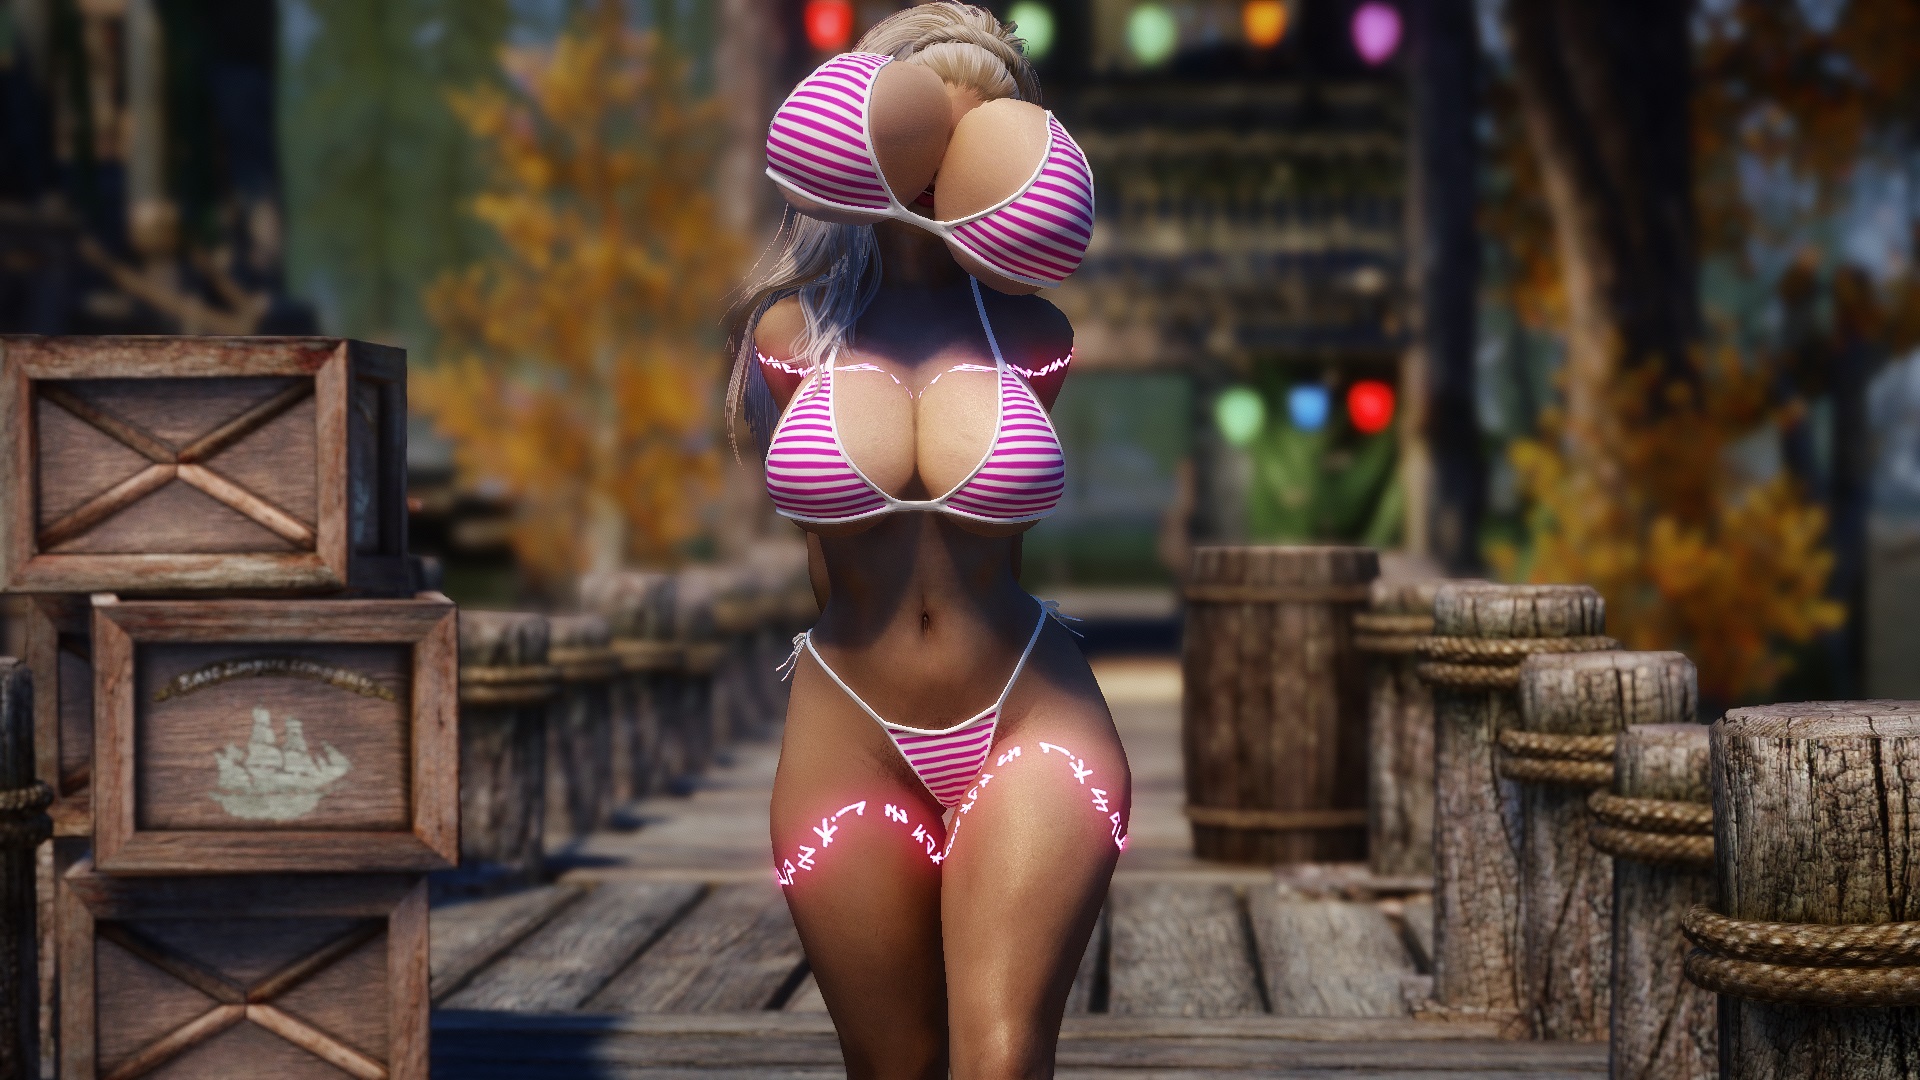 Fallout 4 skimpy outfits